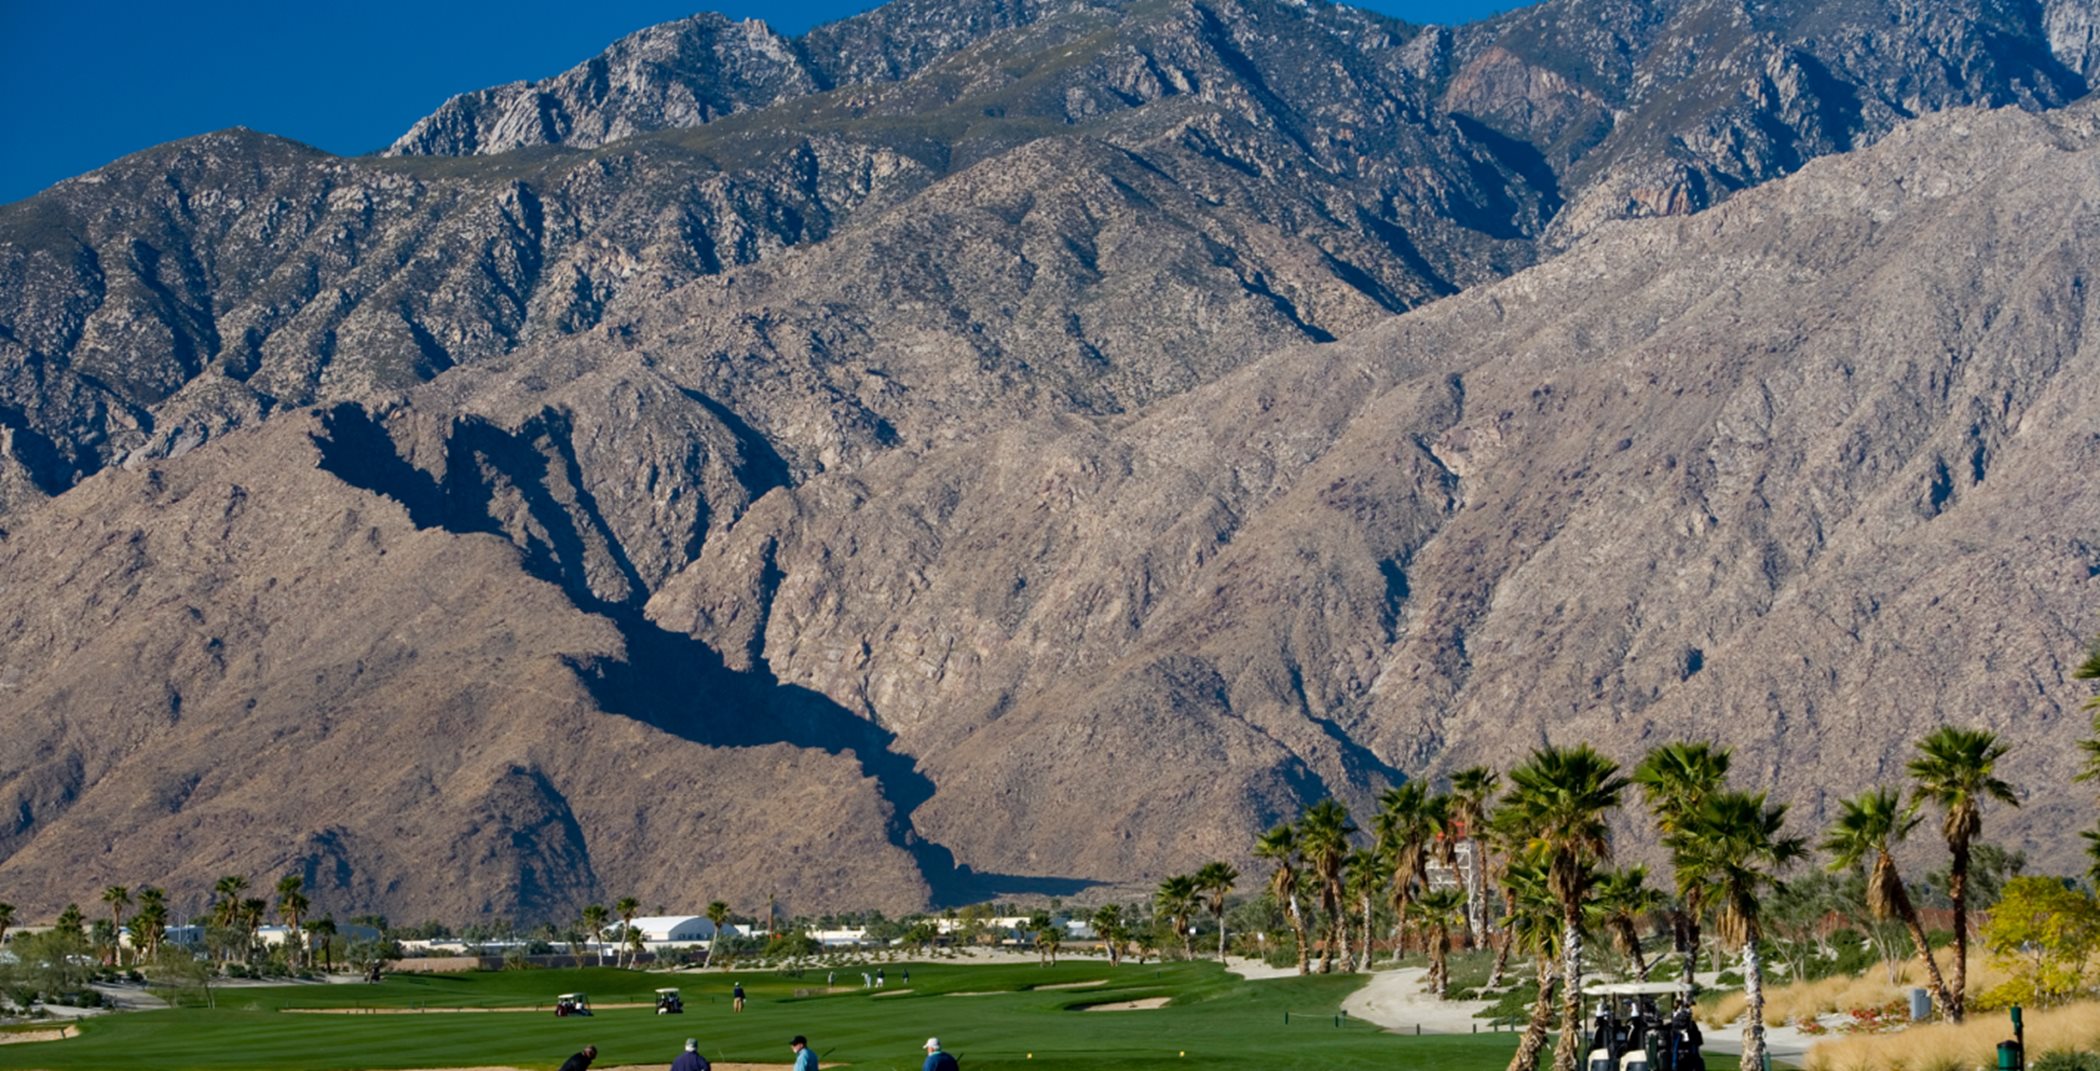 Golf course surrounded by mountains